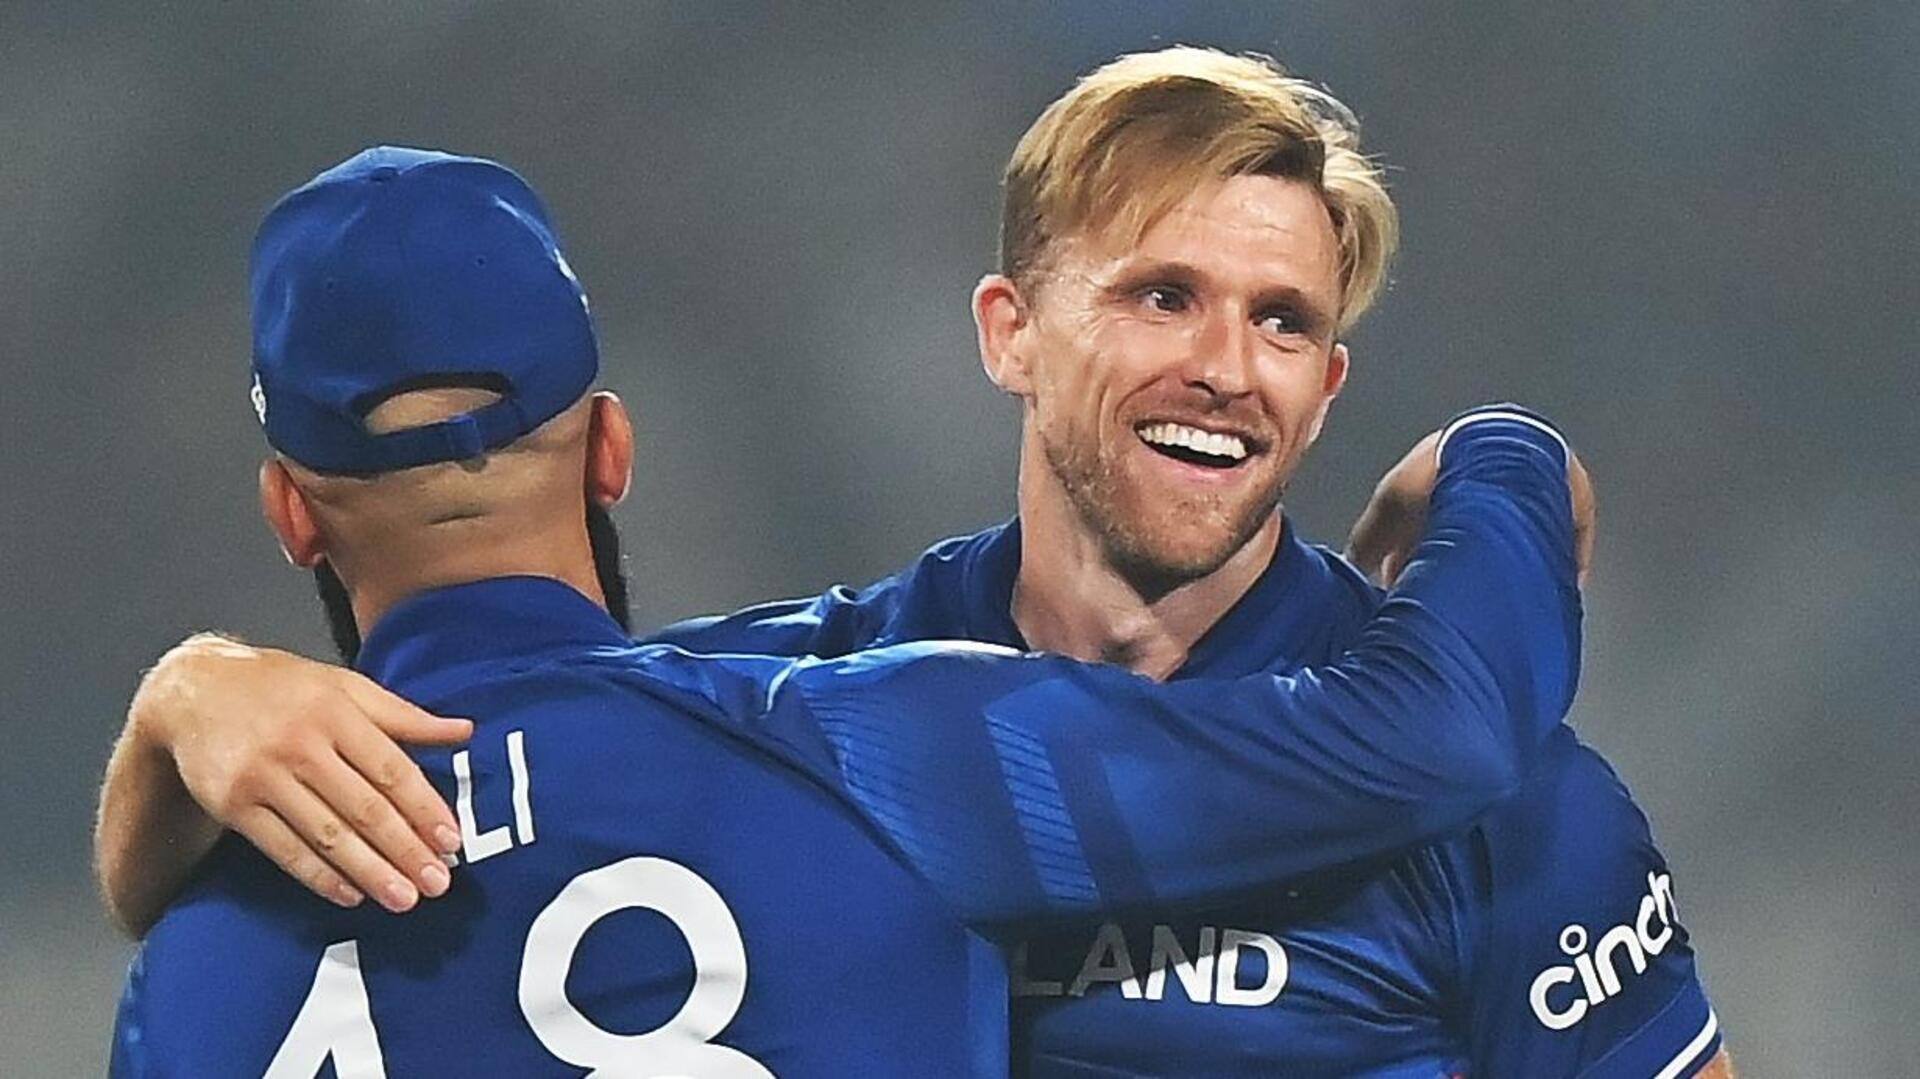 David Willey signs off with 100 ODI wickets: Key stats